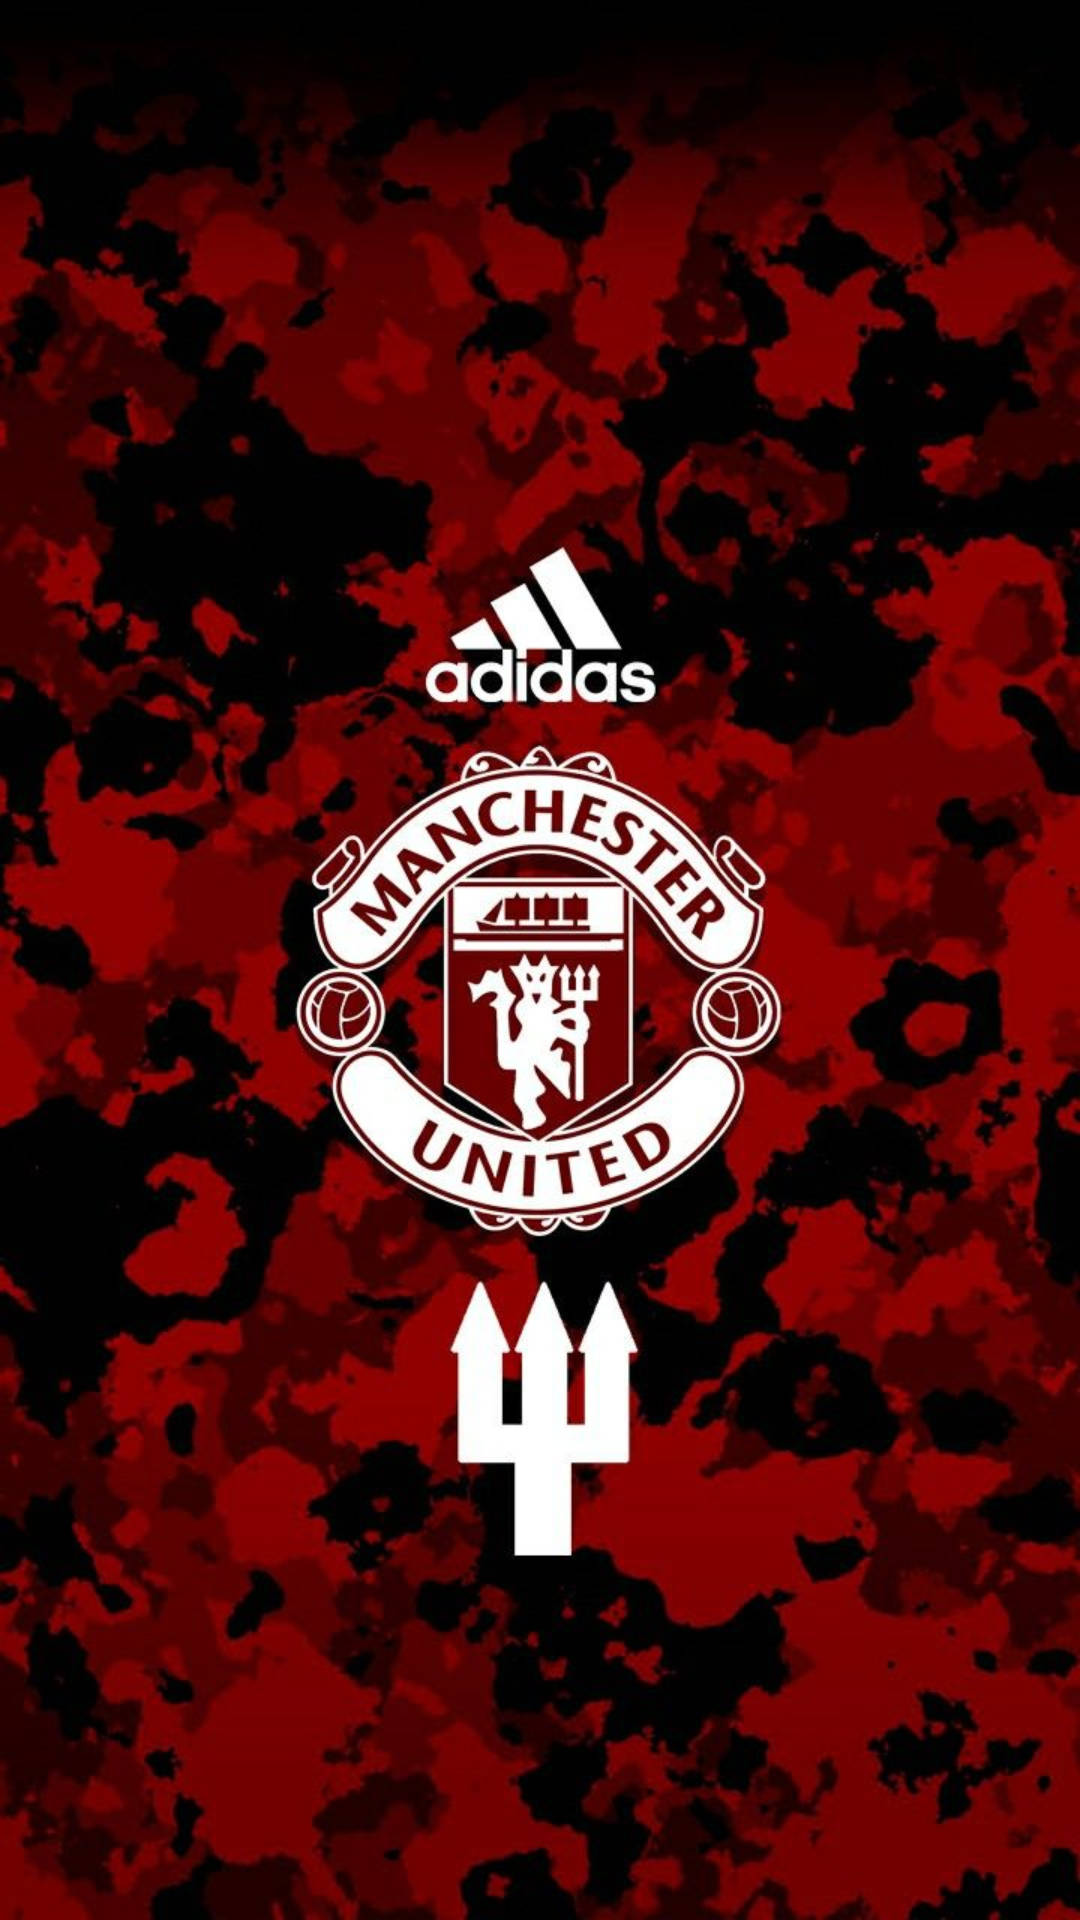 Free Manchester United Mobile Wallpaper Downloads, [100+] Manchester United  Mobile Wallpapers for FREE 